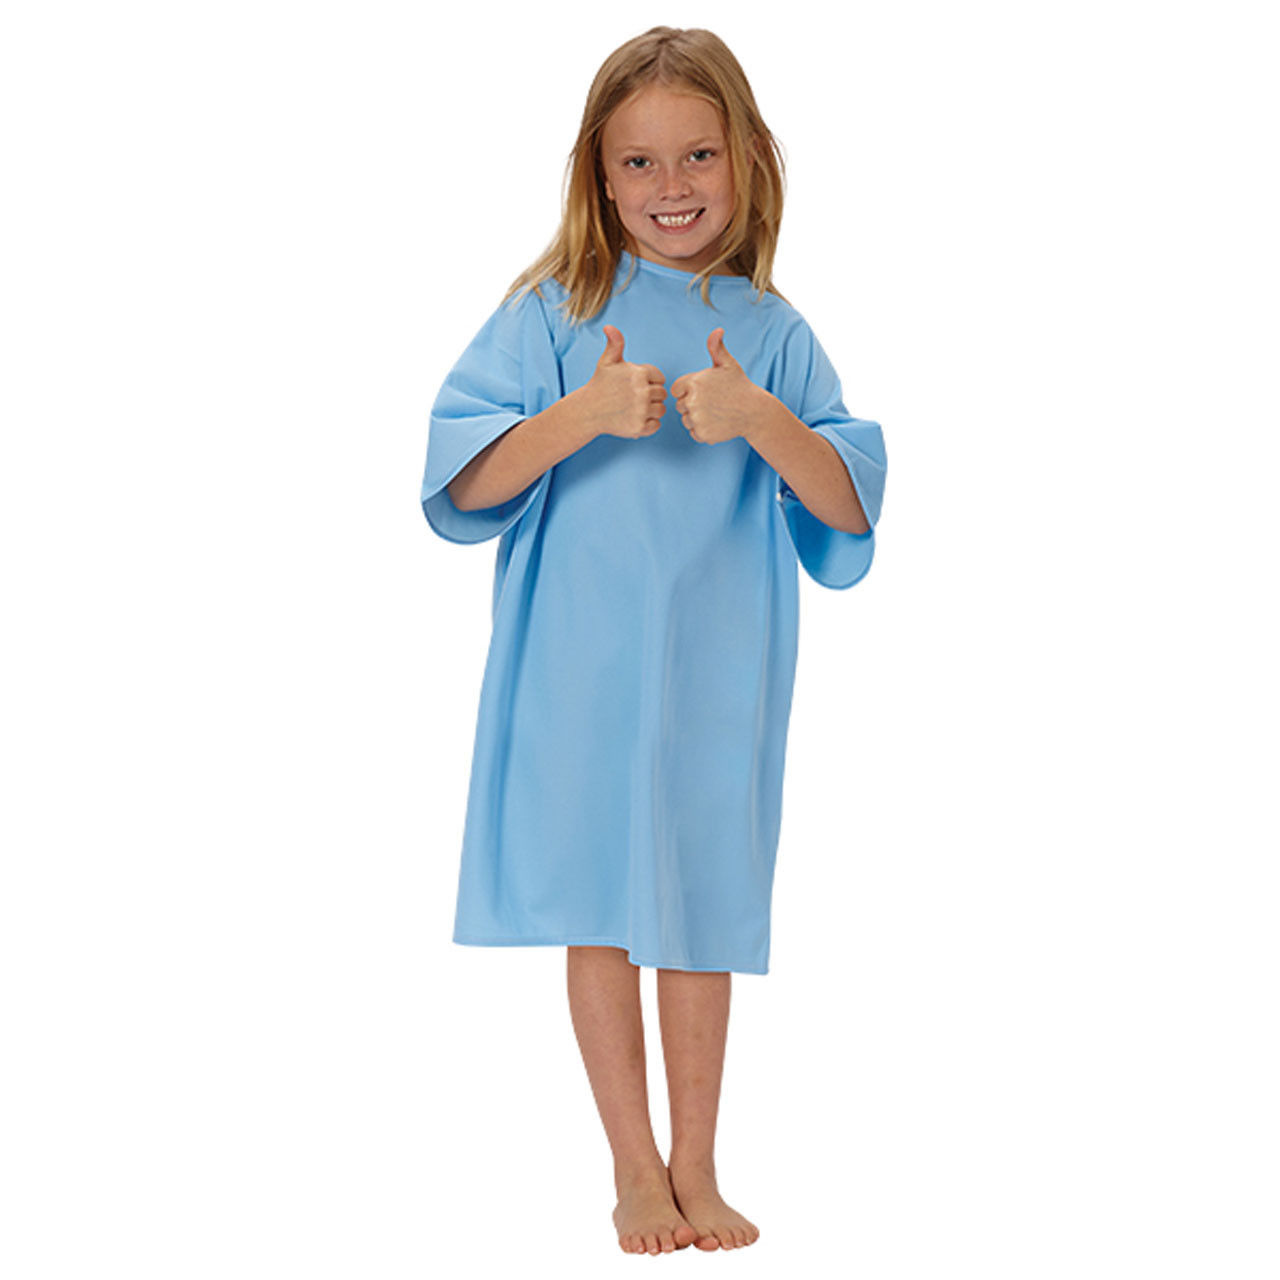 Is this gown designed for a child in a hospital?